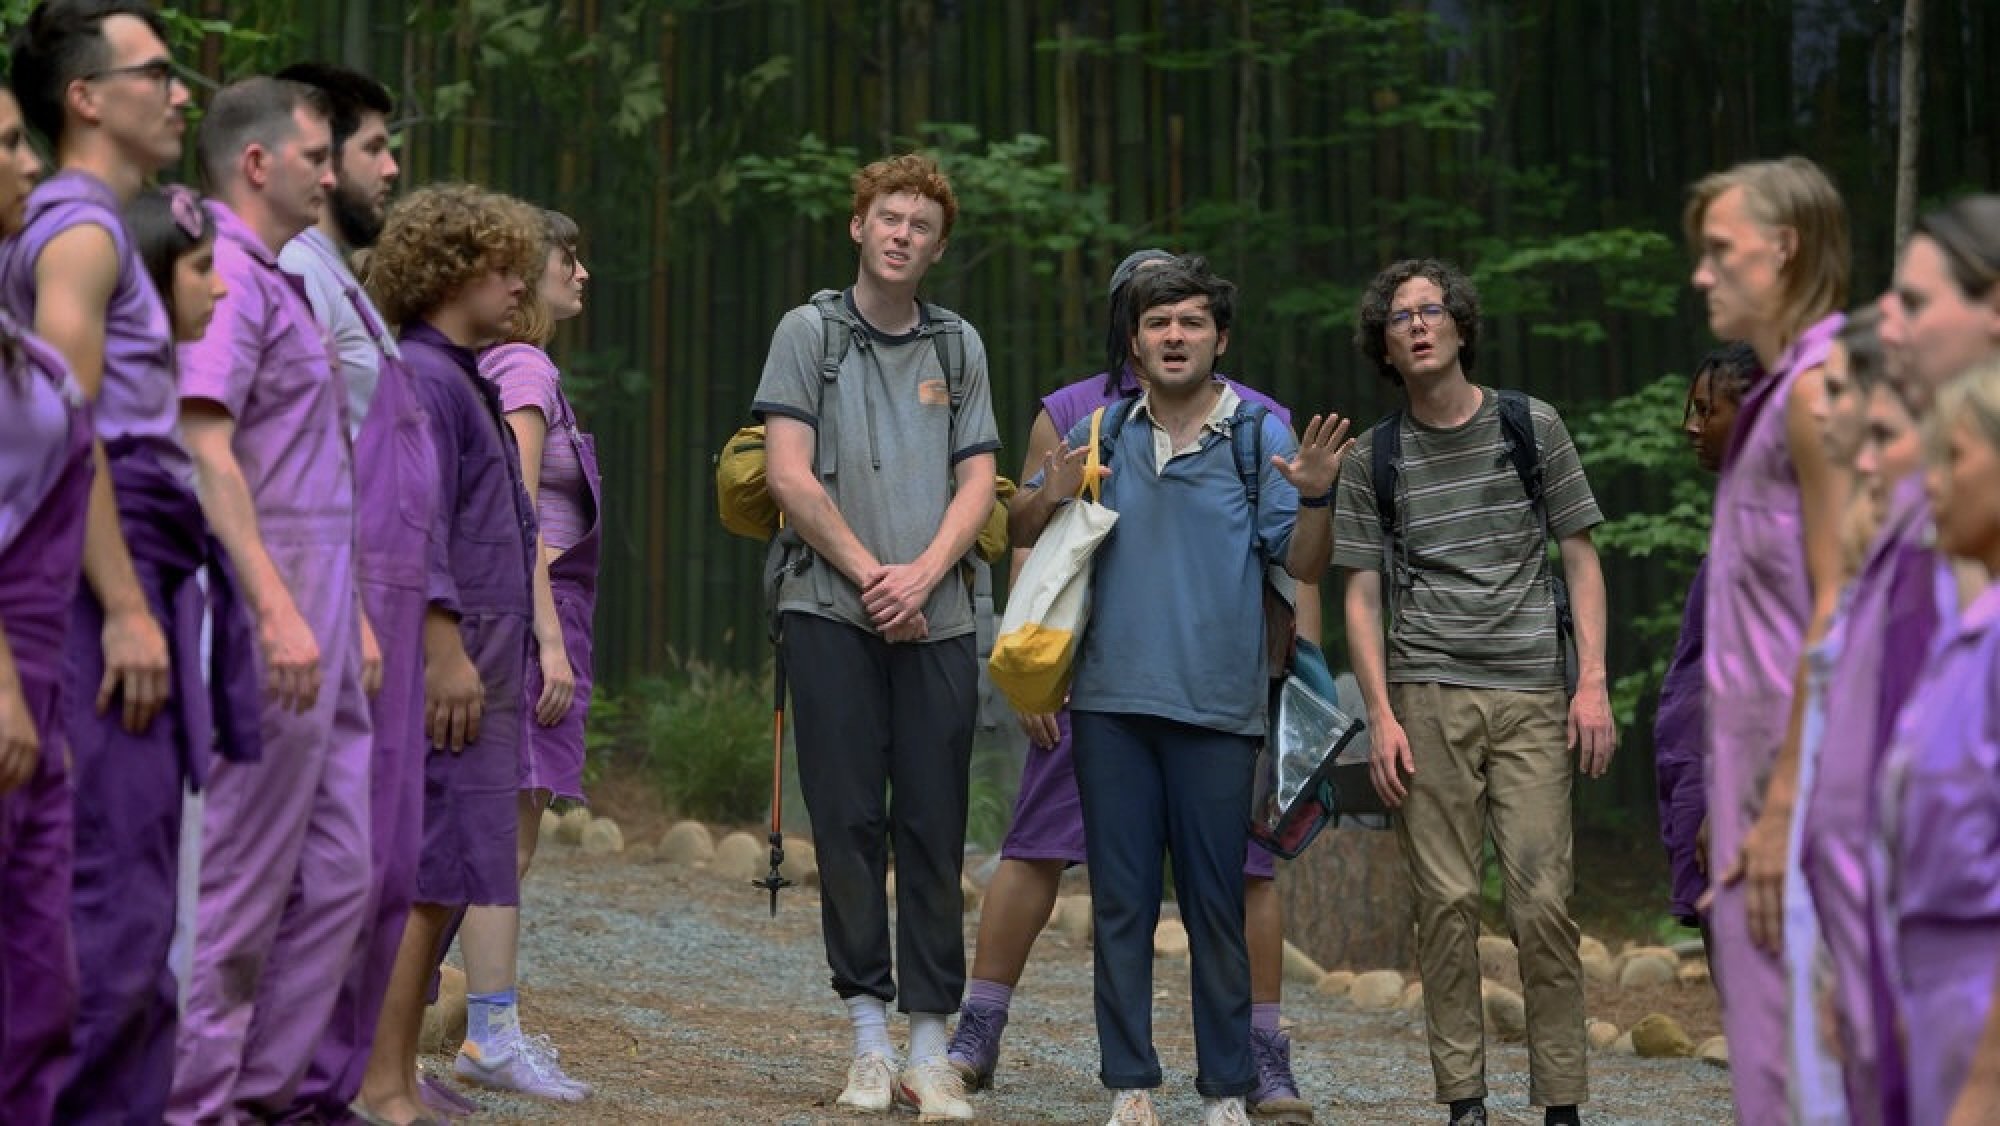 Three young men in hiking clothes walk through a crowd of people in purple clothes.